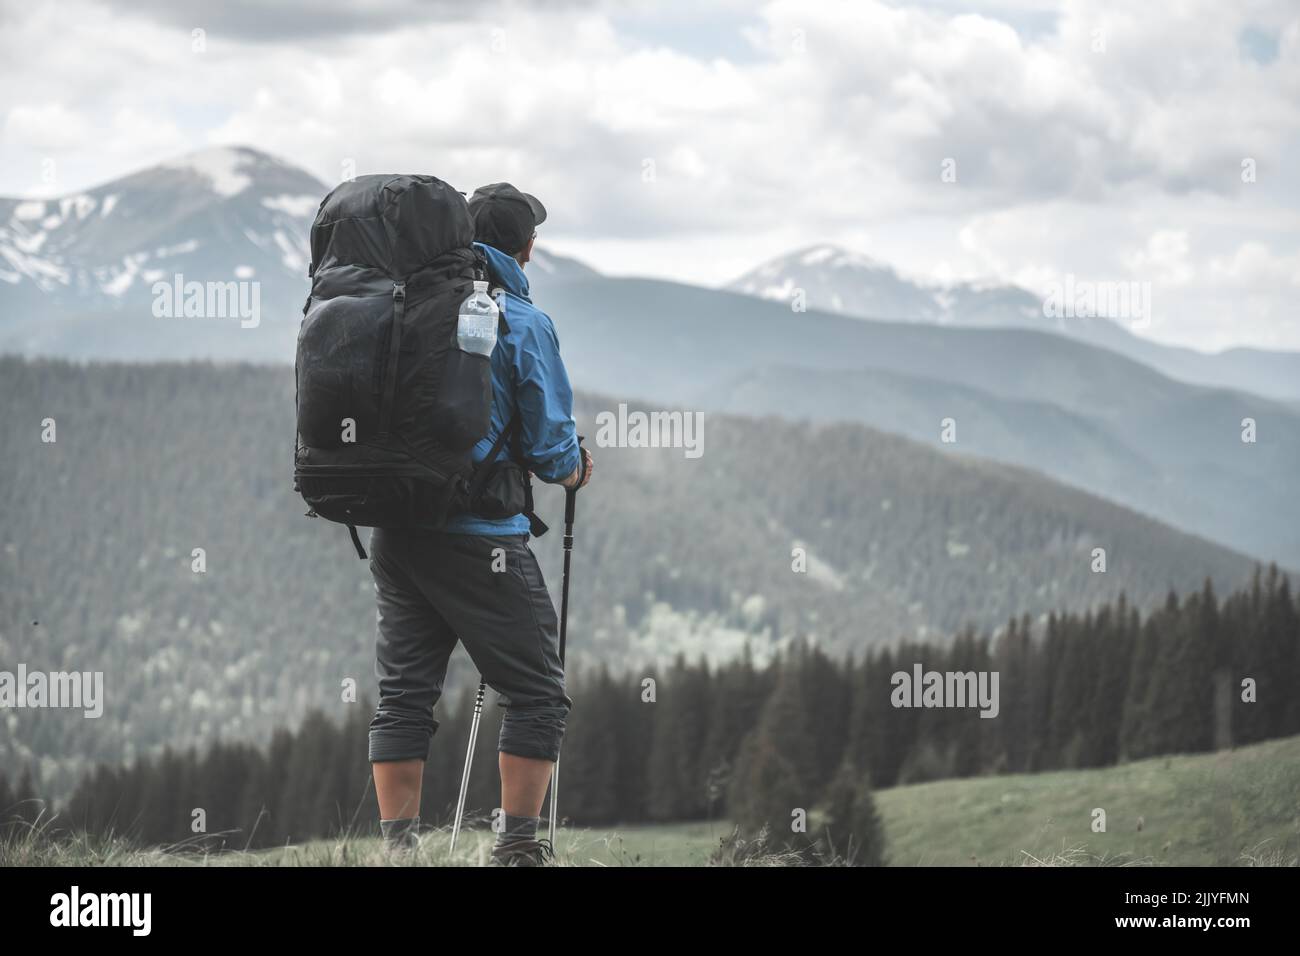 A tourist with backpack hiking in the spring mountains. Snowy mountains range on the background. Landscape photography Stock Photo